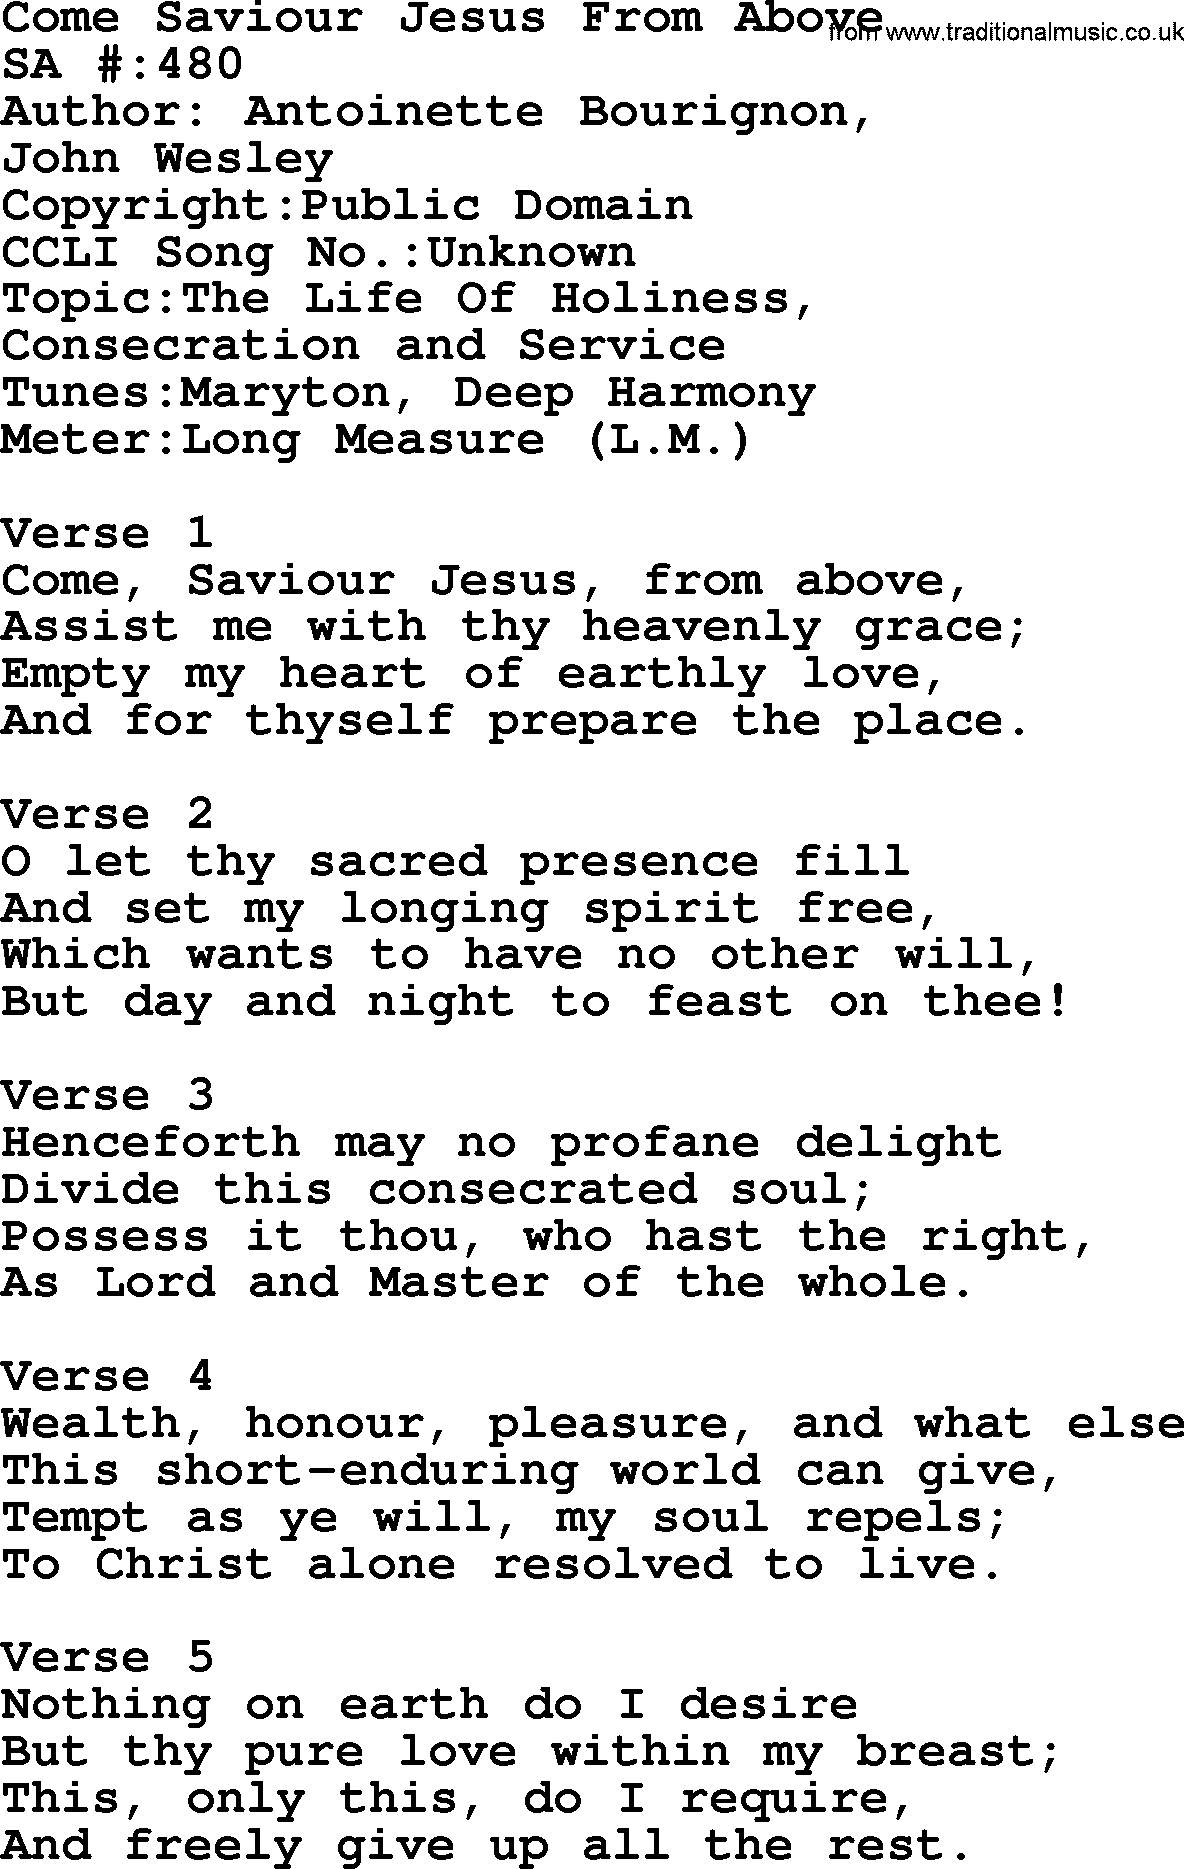 Salvation Army Hymnal, title: Come Saviour Jesus From Above, with lyrics and PDF,